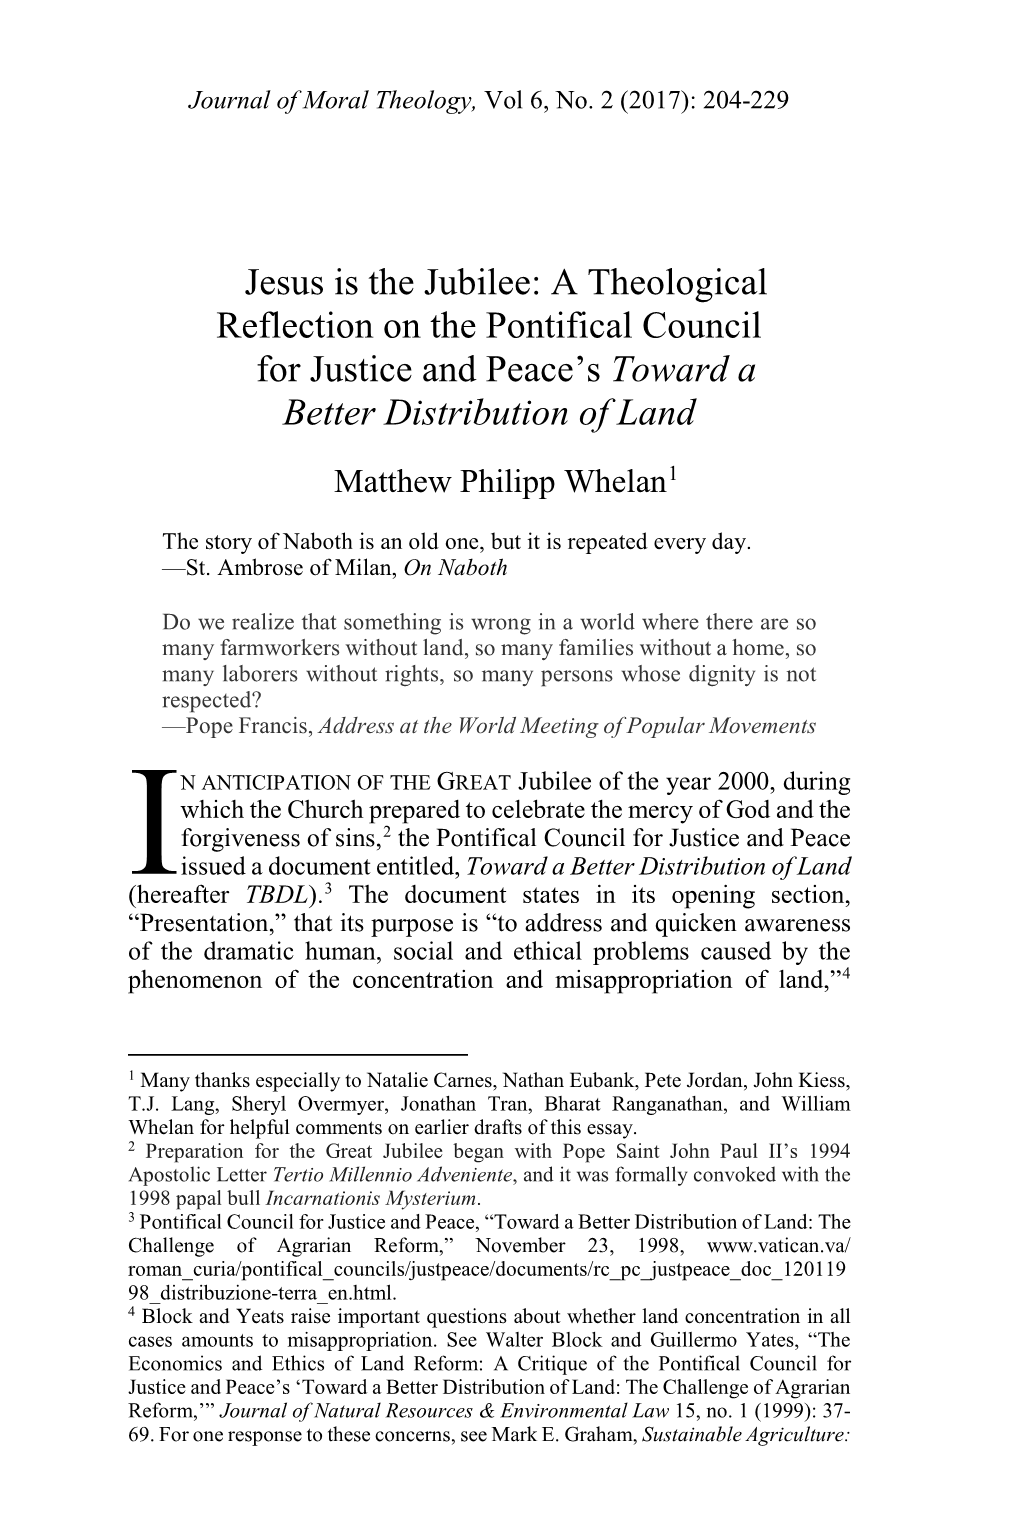 Jesus Is the Jubilee: a Theological Reflection on the Pontifical Council for Justice and Peace’S Toward a Better Distribution of Land